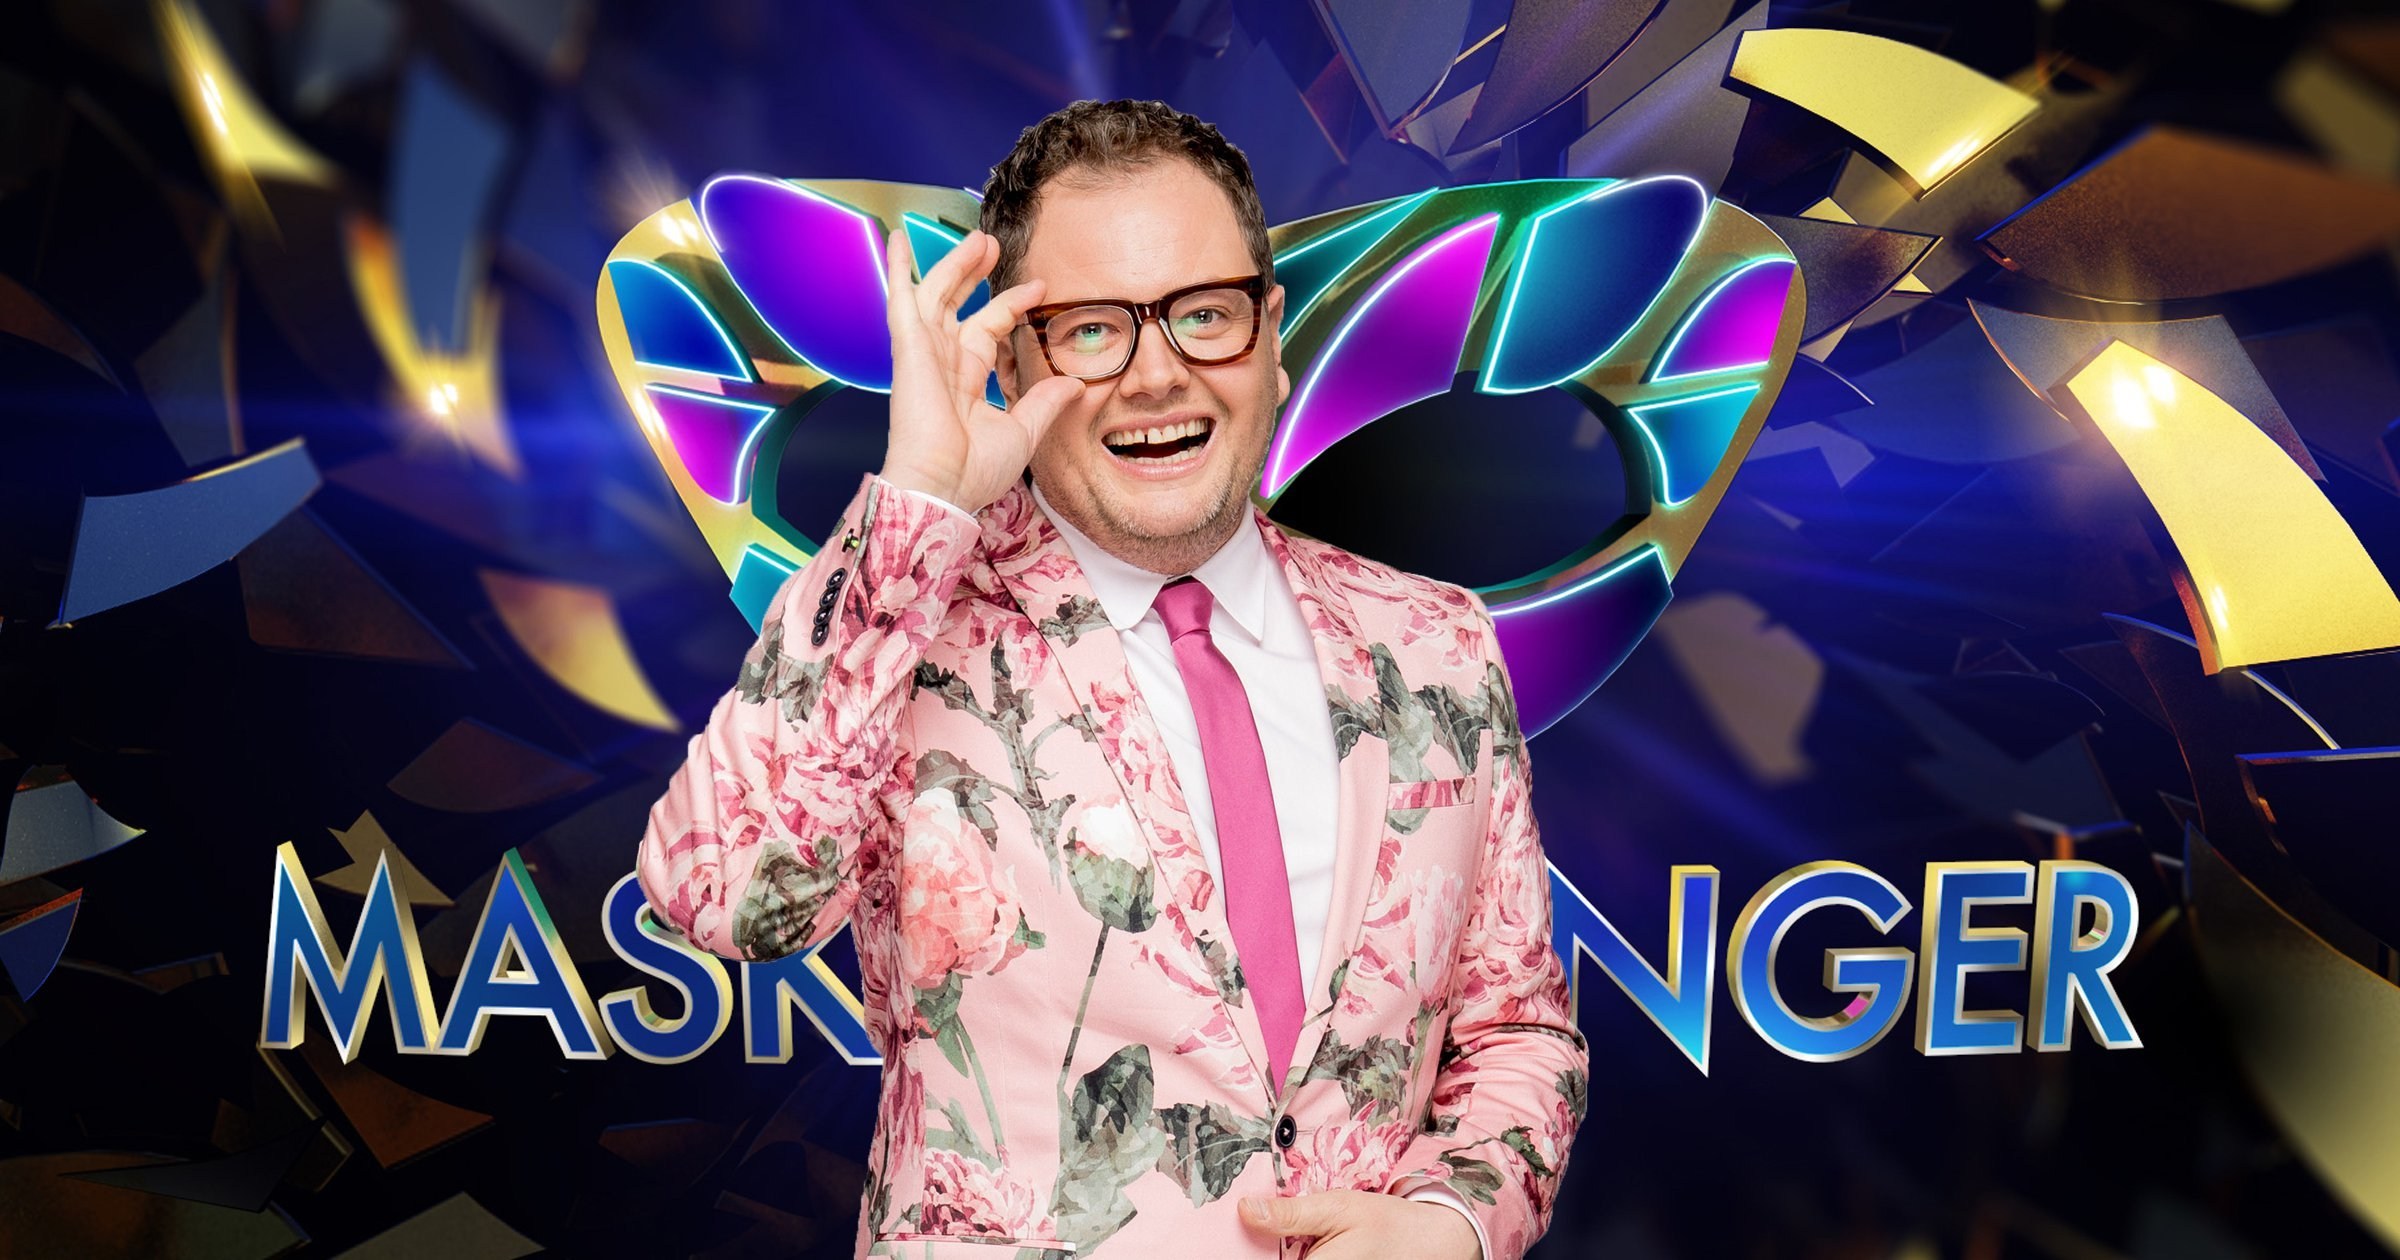 The Masked Singer UK: Alan Carr to join panel as guest judge